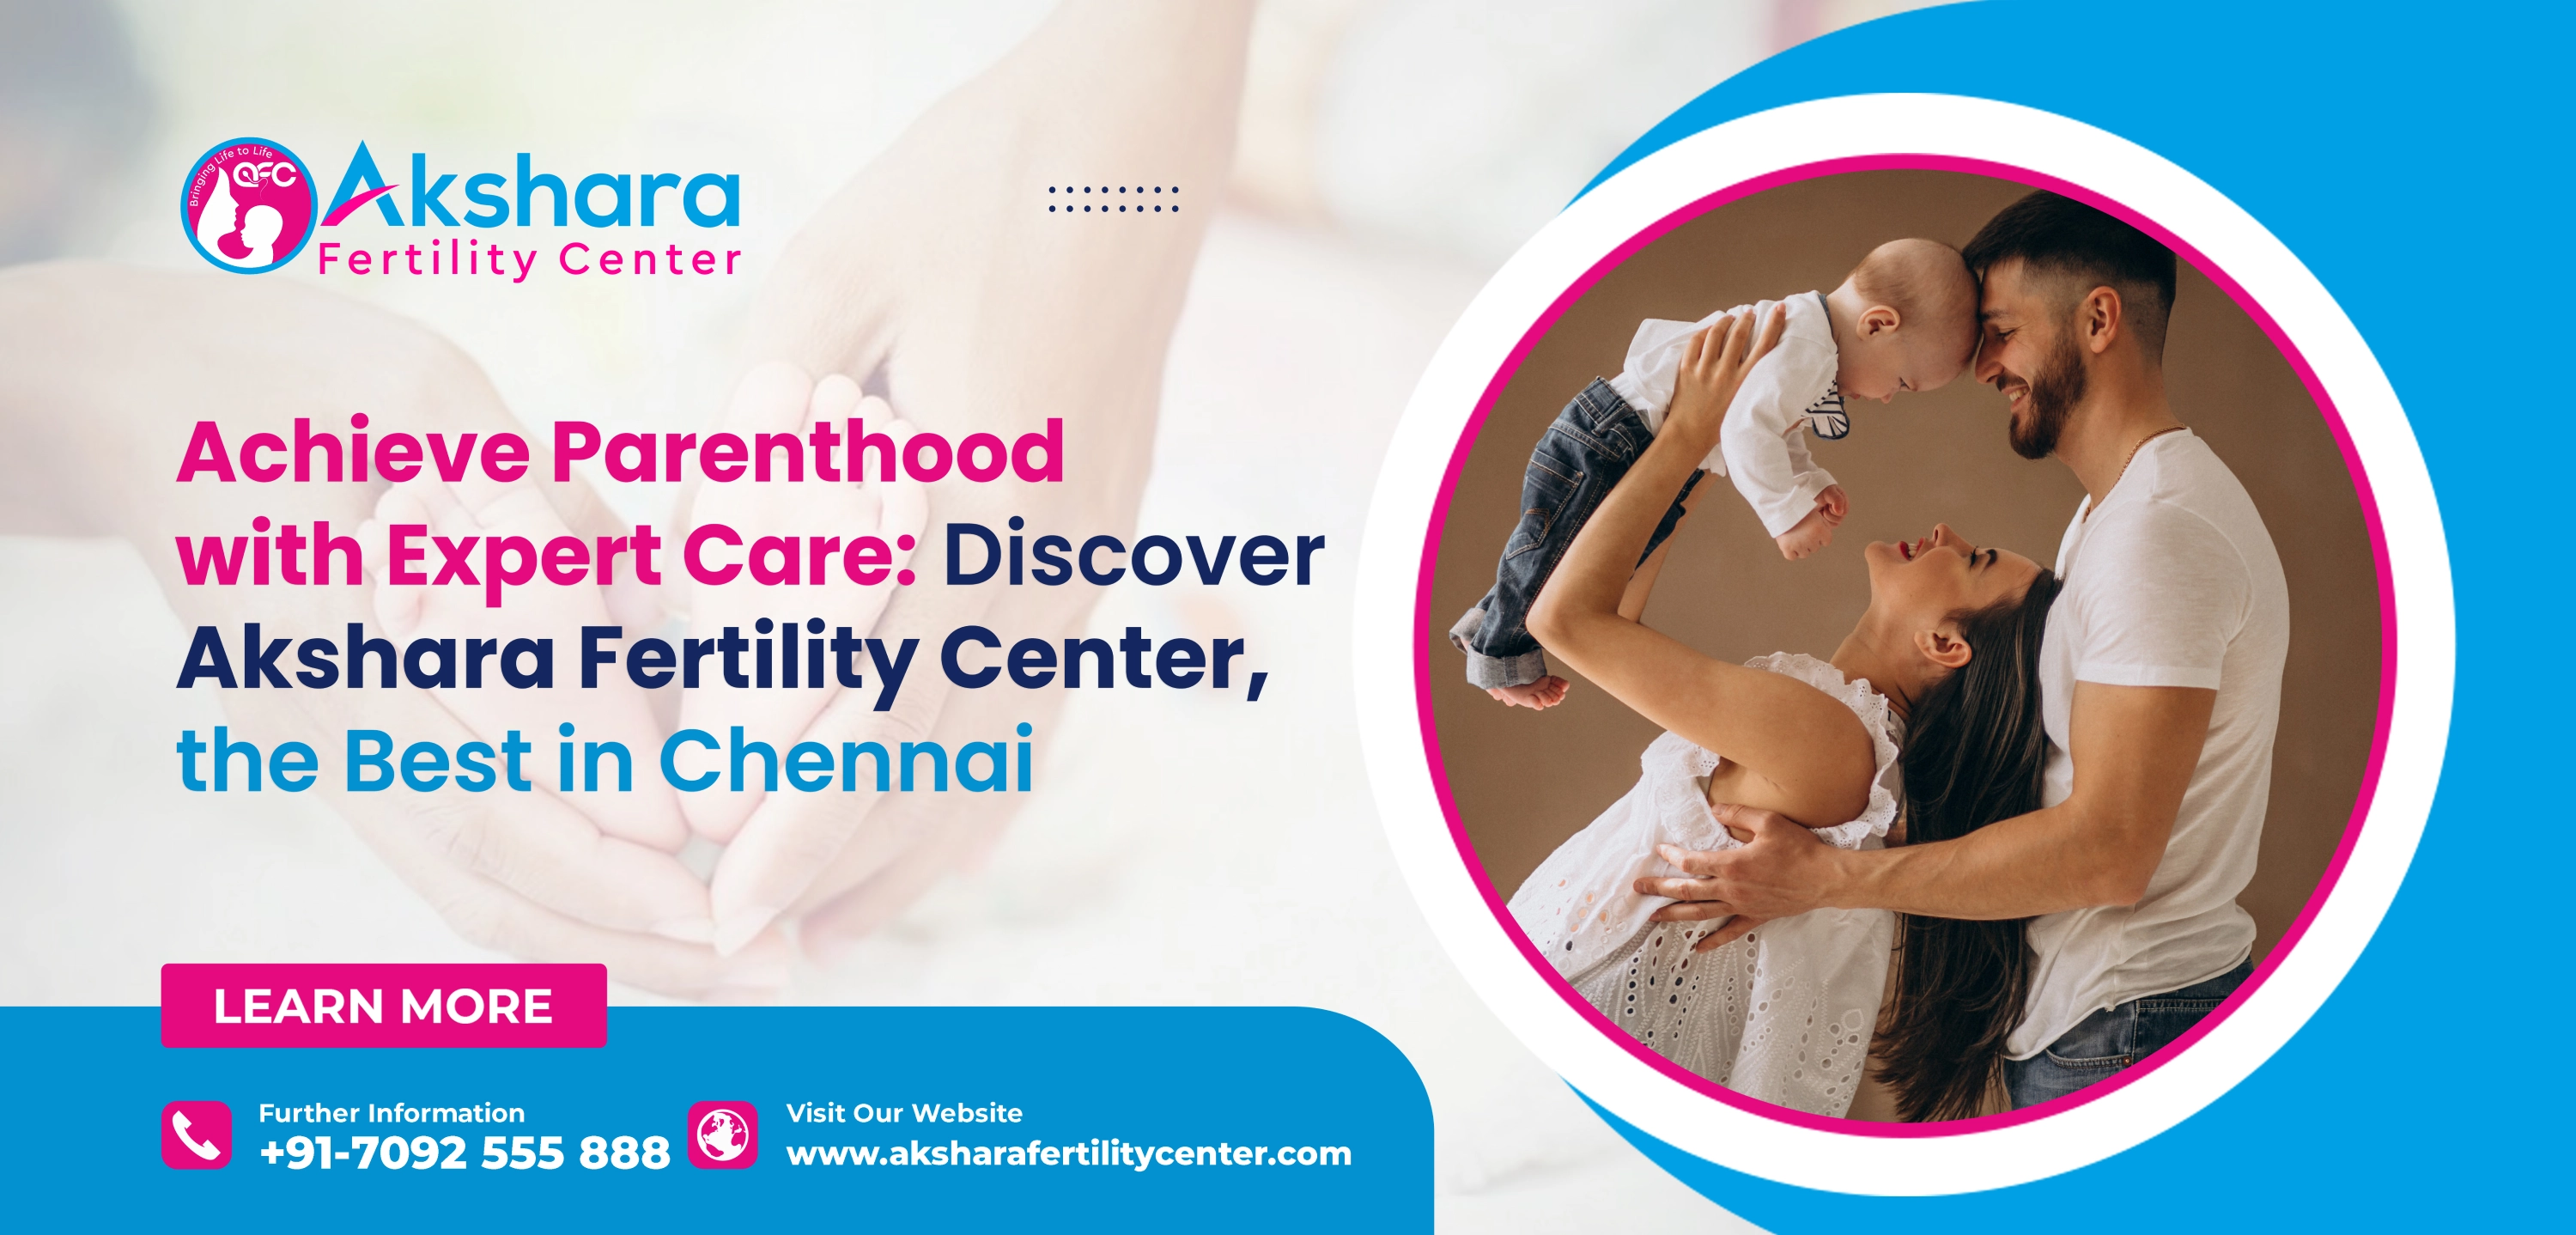 Achieve Parenthood with Expert Care: Discover Akshara Fertility Center, the Best in Chennai